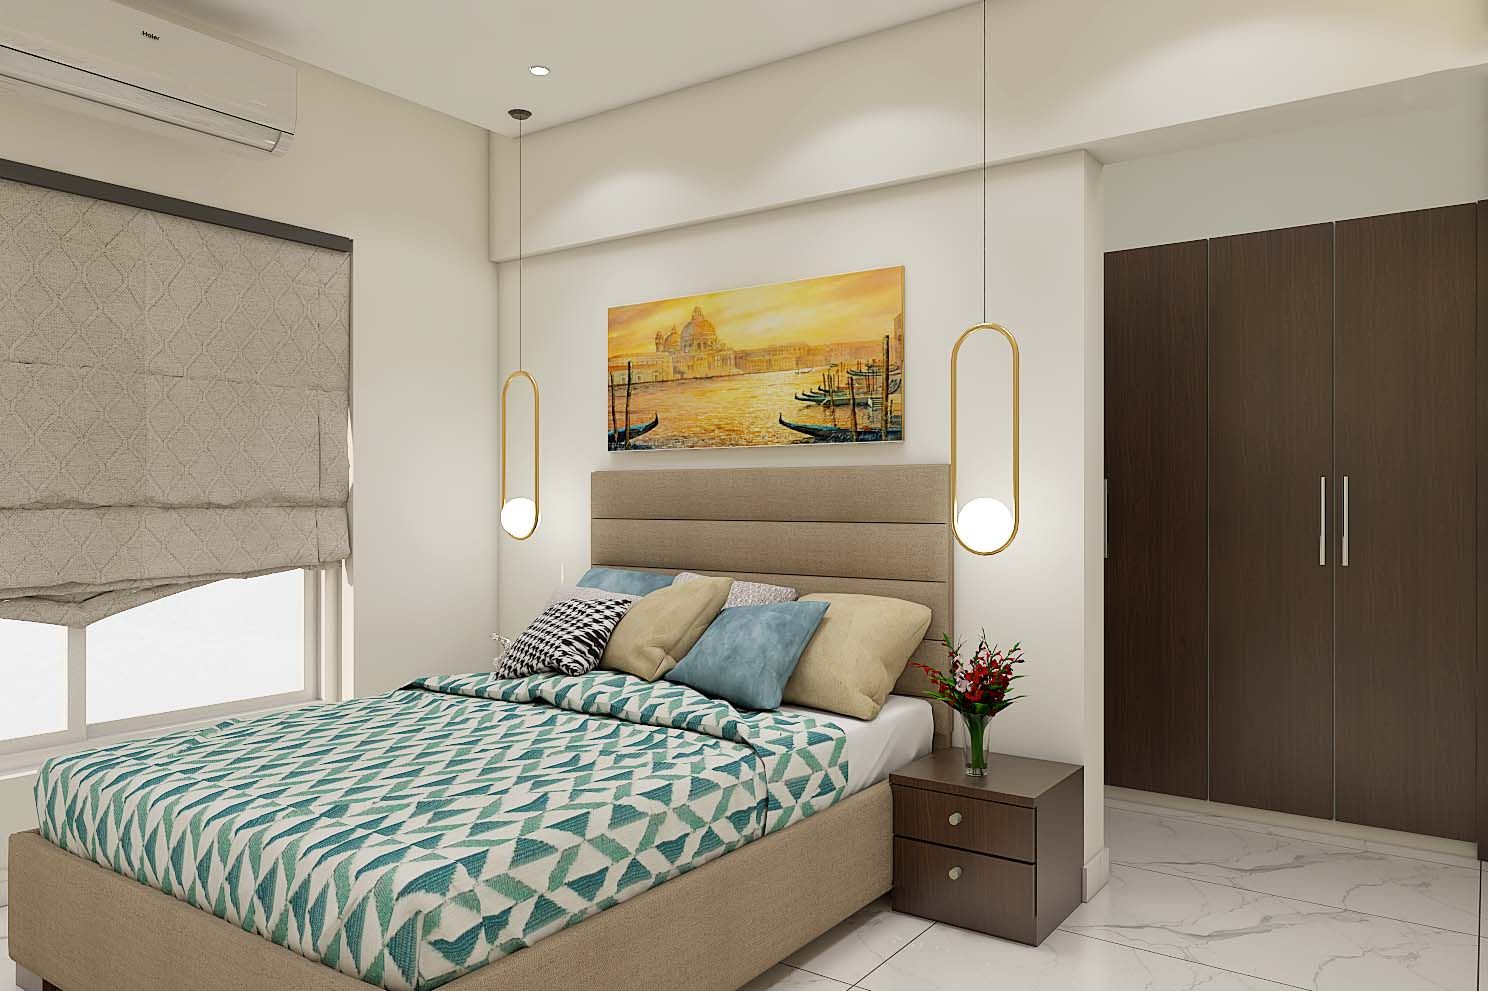 Budget-Friendly Guest Bedroom Design With Lively Pendant Lights | Livspace